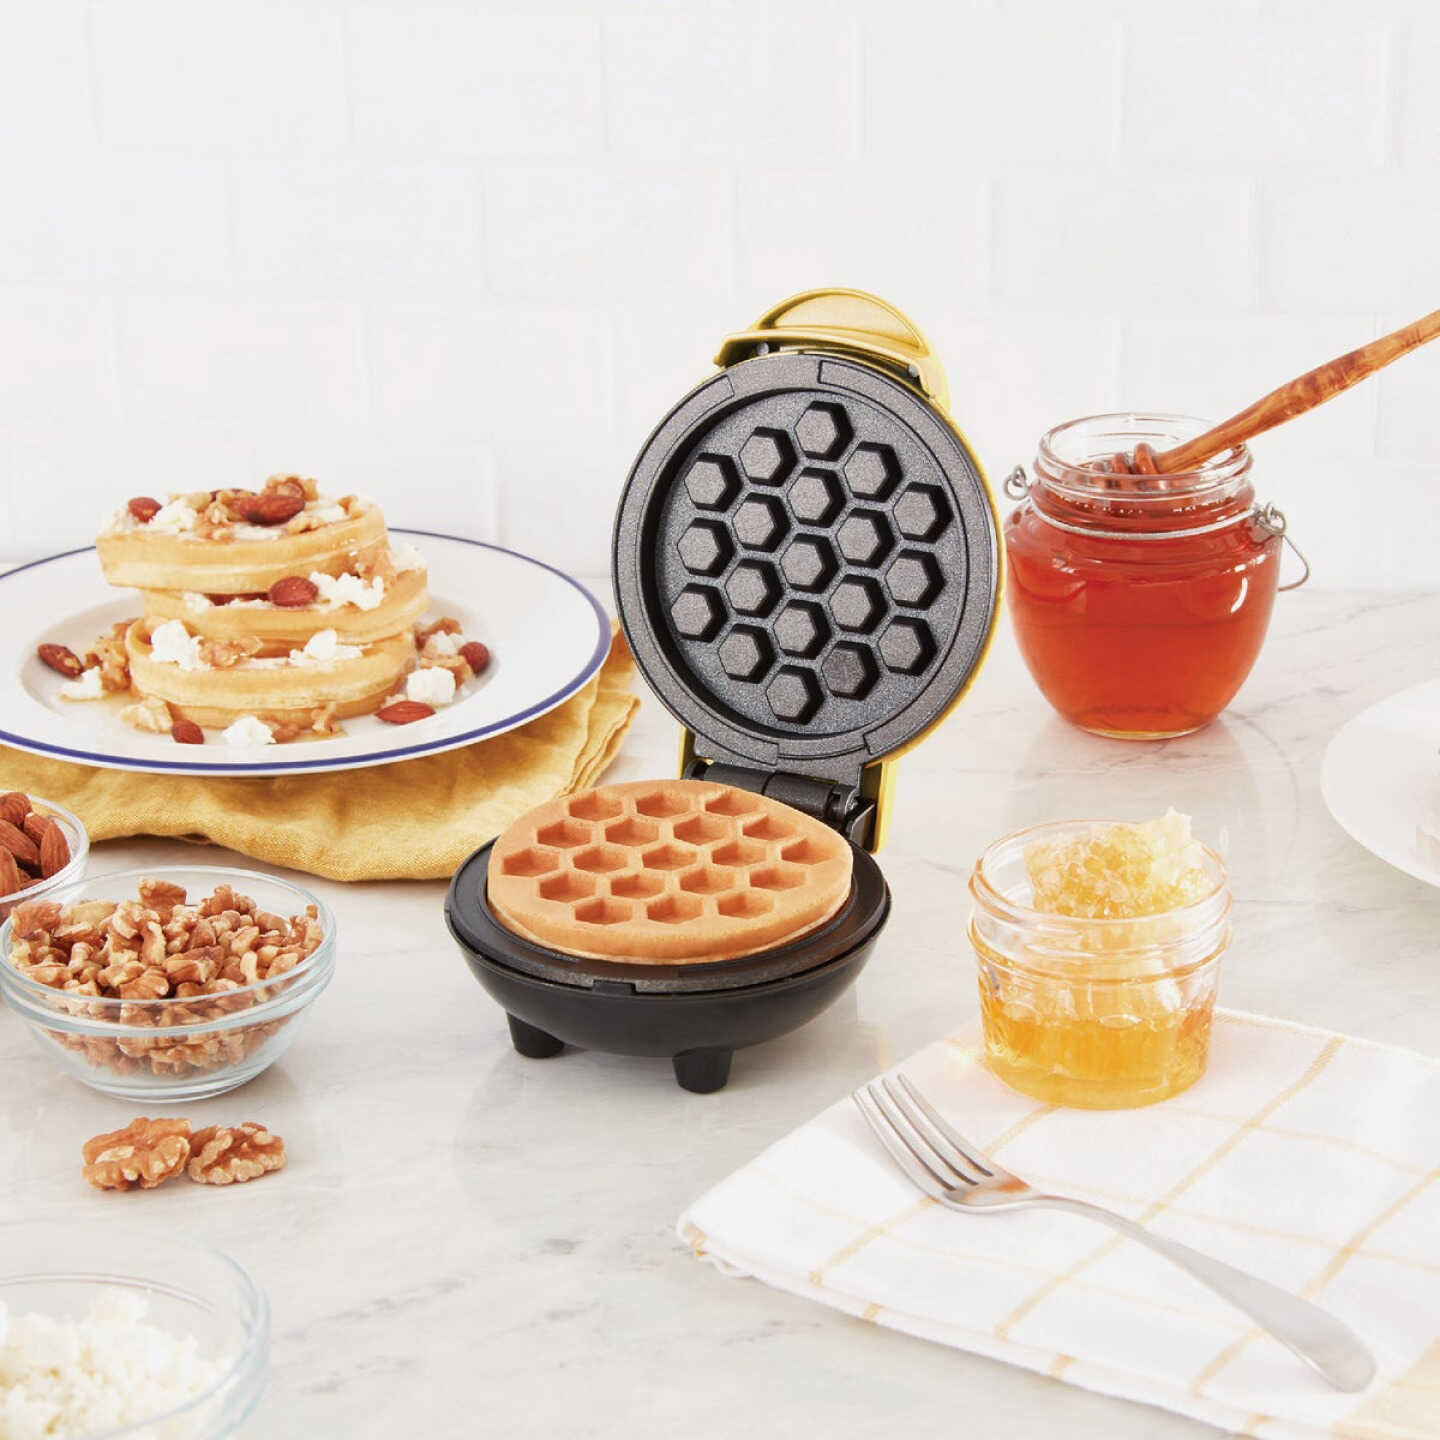 Gingerbread Man and Snowflake waffle makers are out now at Target